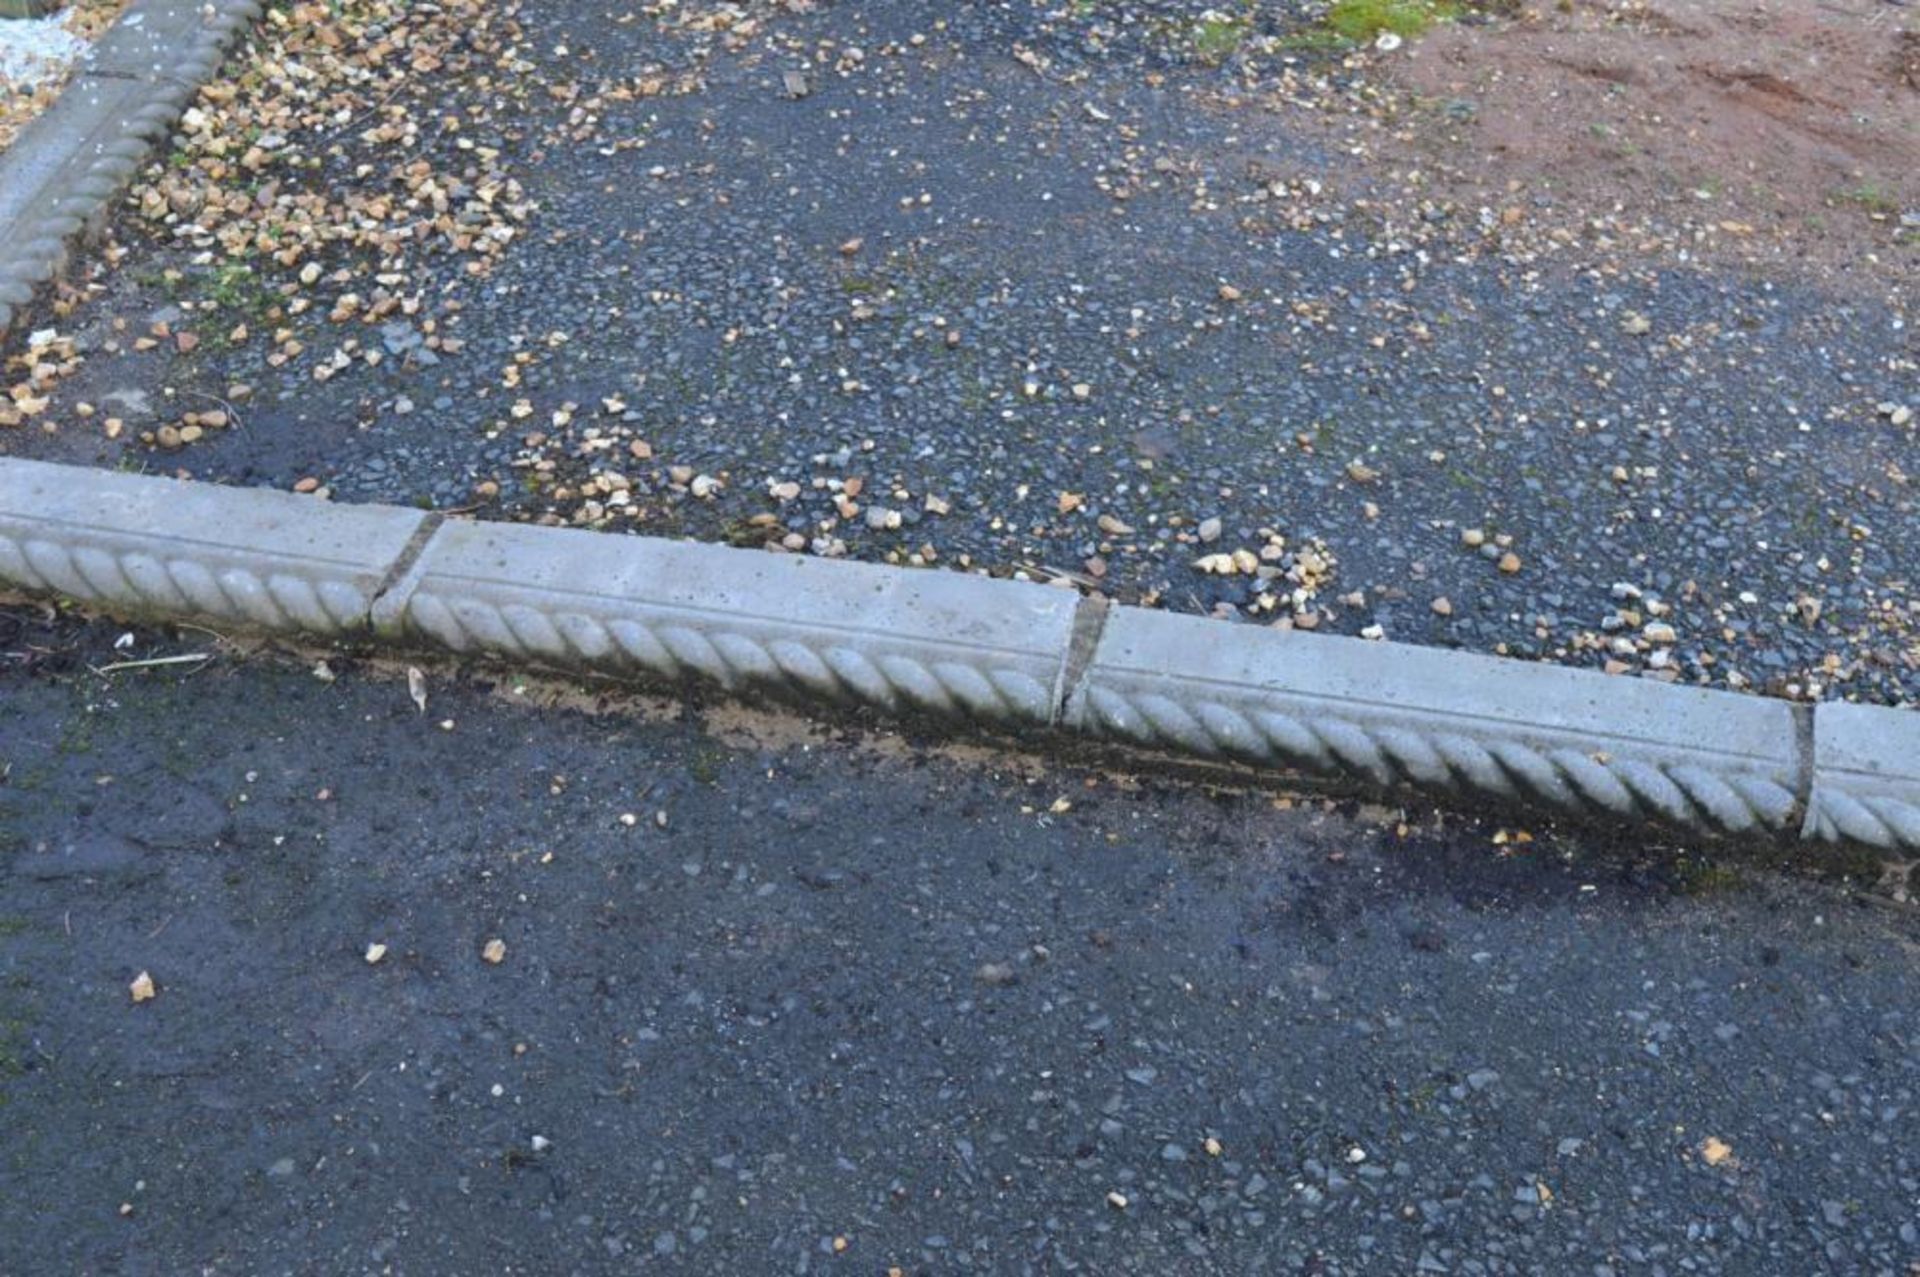 25 x Border Paver Bricks - Lawn Edging With Rope Design - L60 x H17 cms - Ref BB793 OS - CL351 - Loc - Image 4 of 4